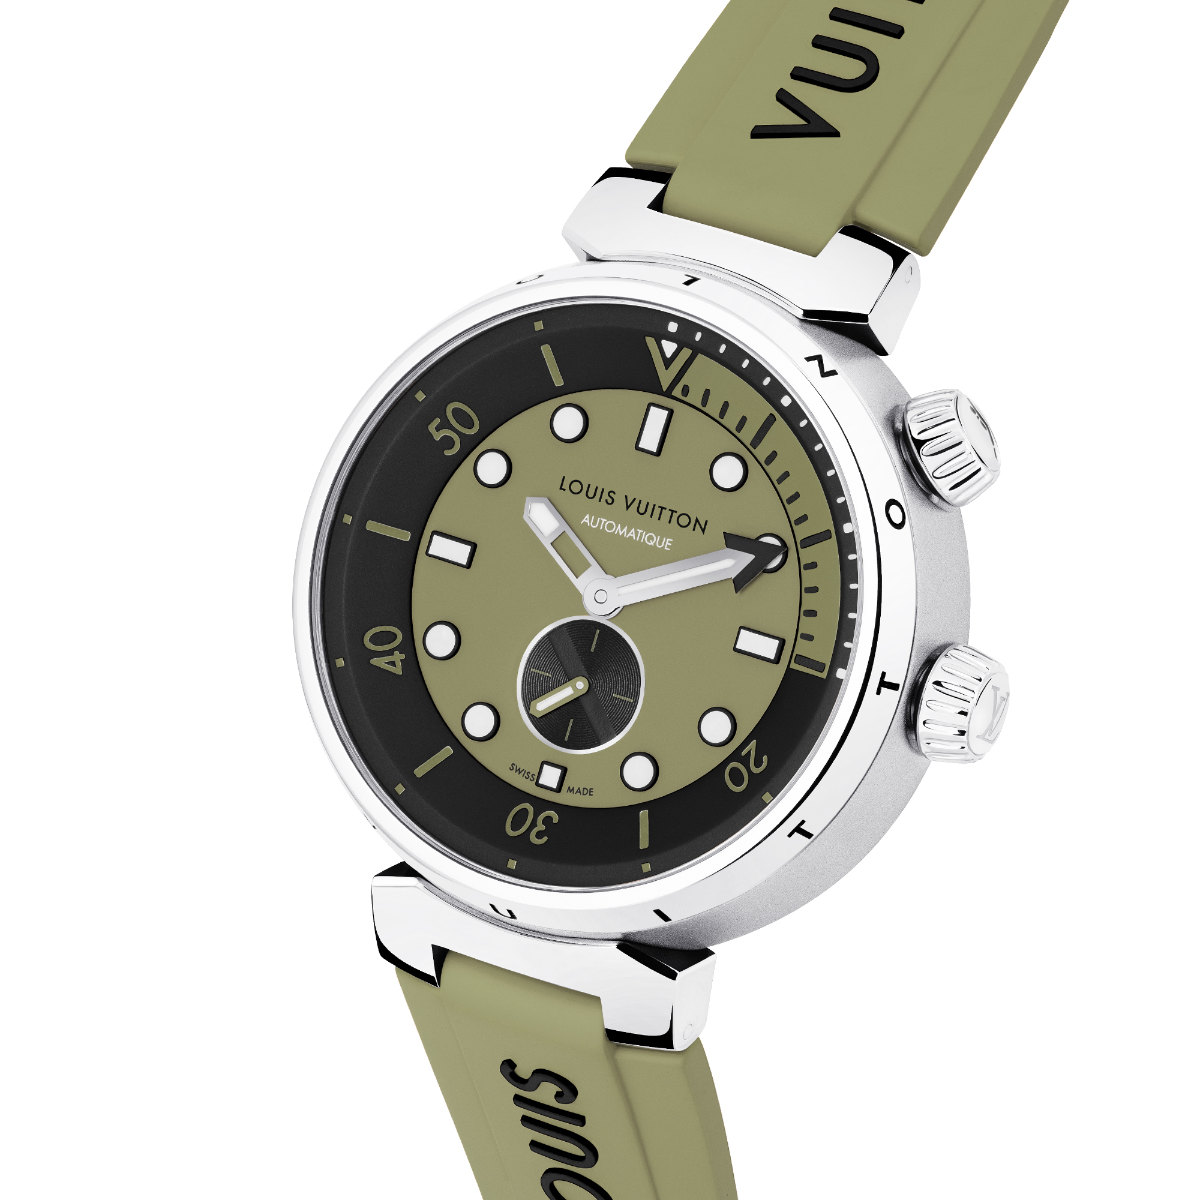 Tambour Street Diver: Two New Looks For The Sporty Urban Timepiece